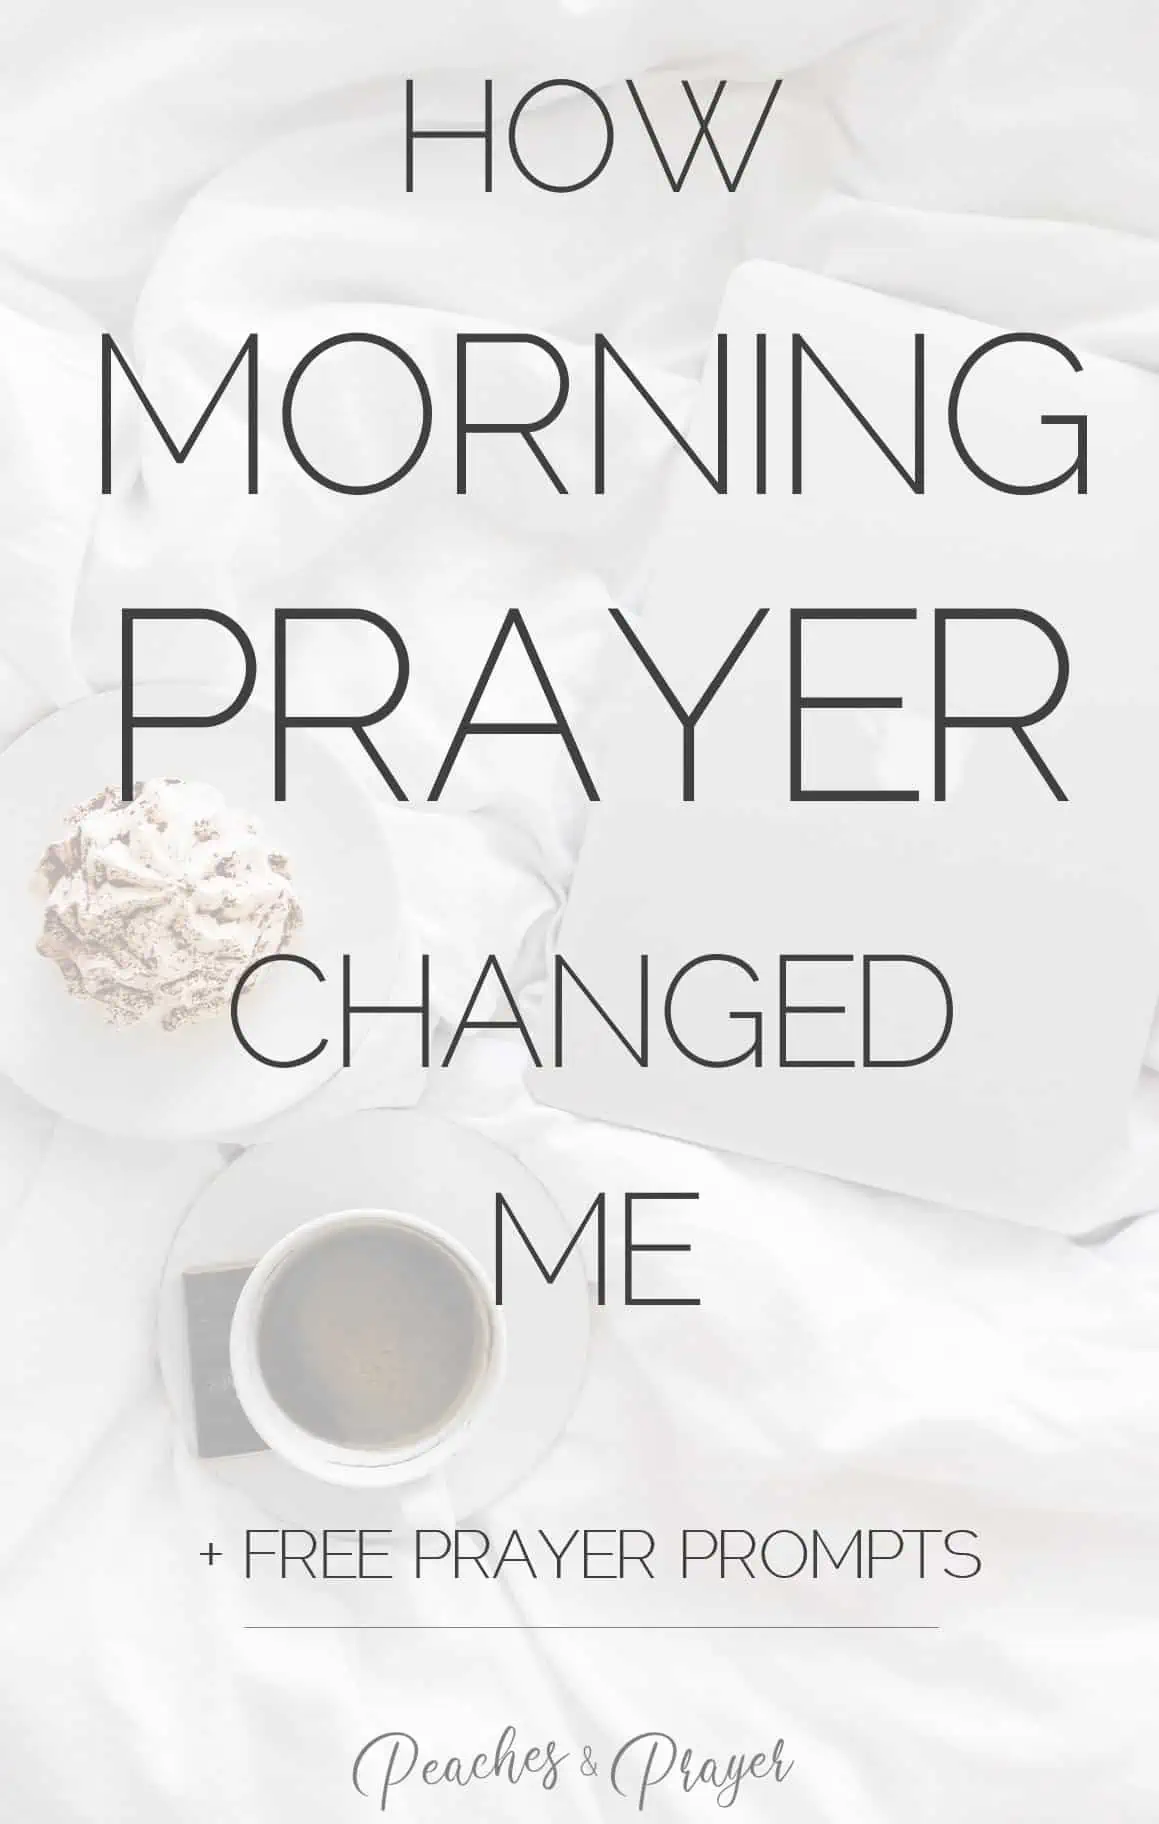 30 Days of 10 Minute Morning Prayer Prompts